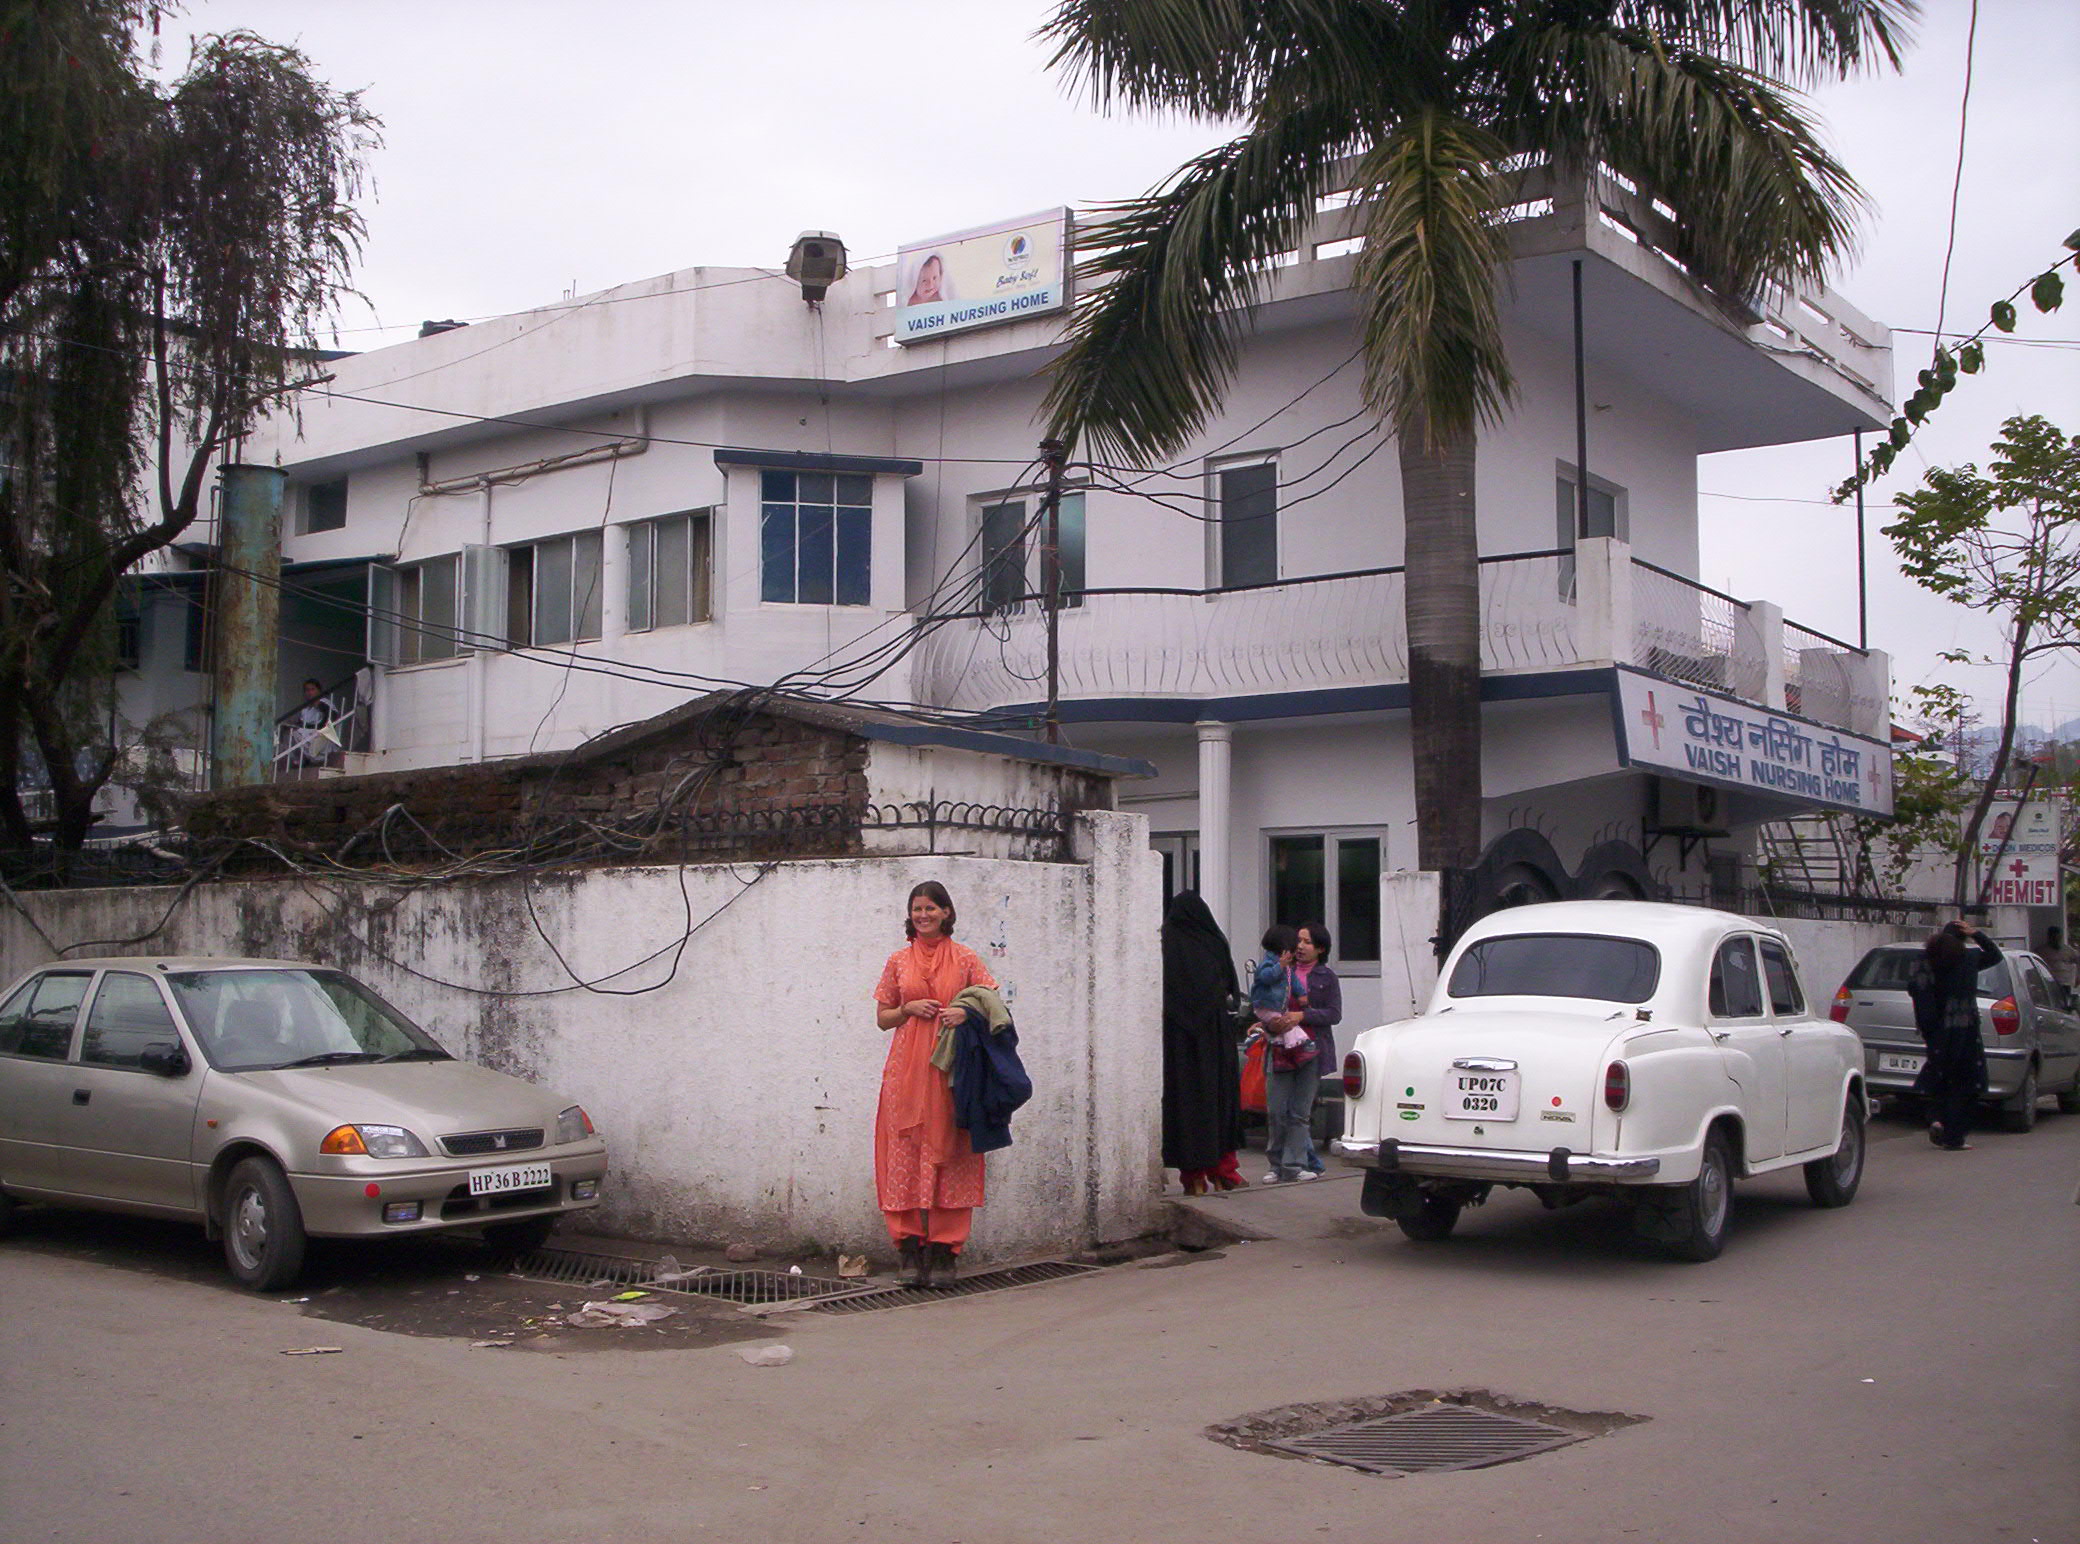 women dressed in colorful clothing outside a white building with parked cars